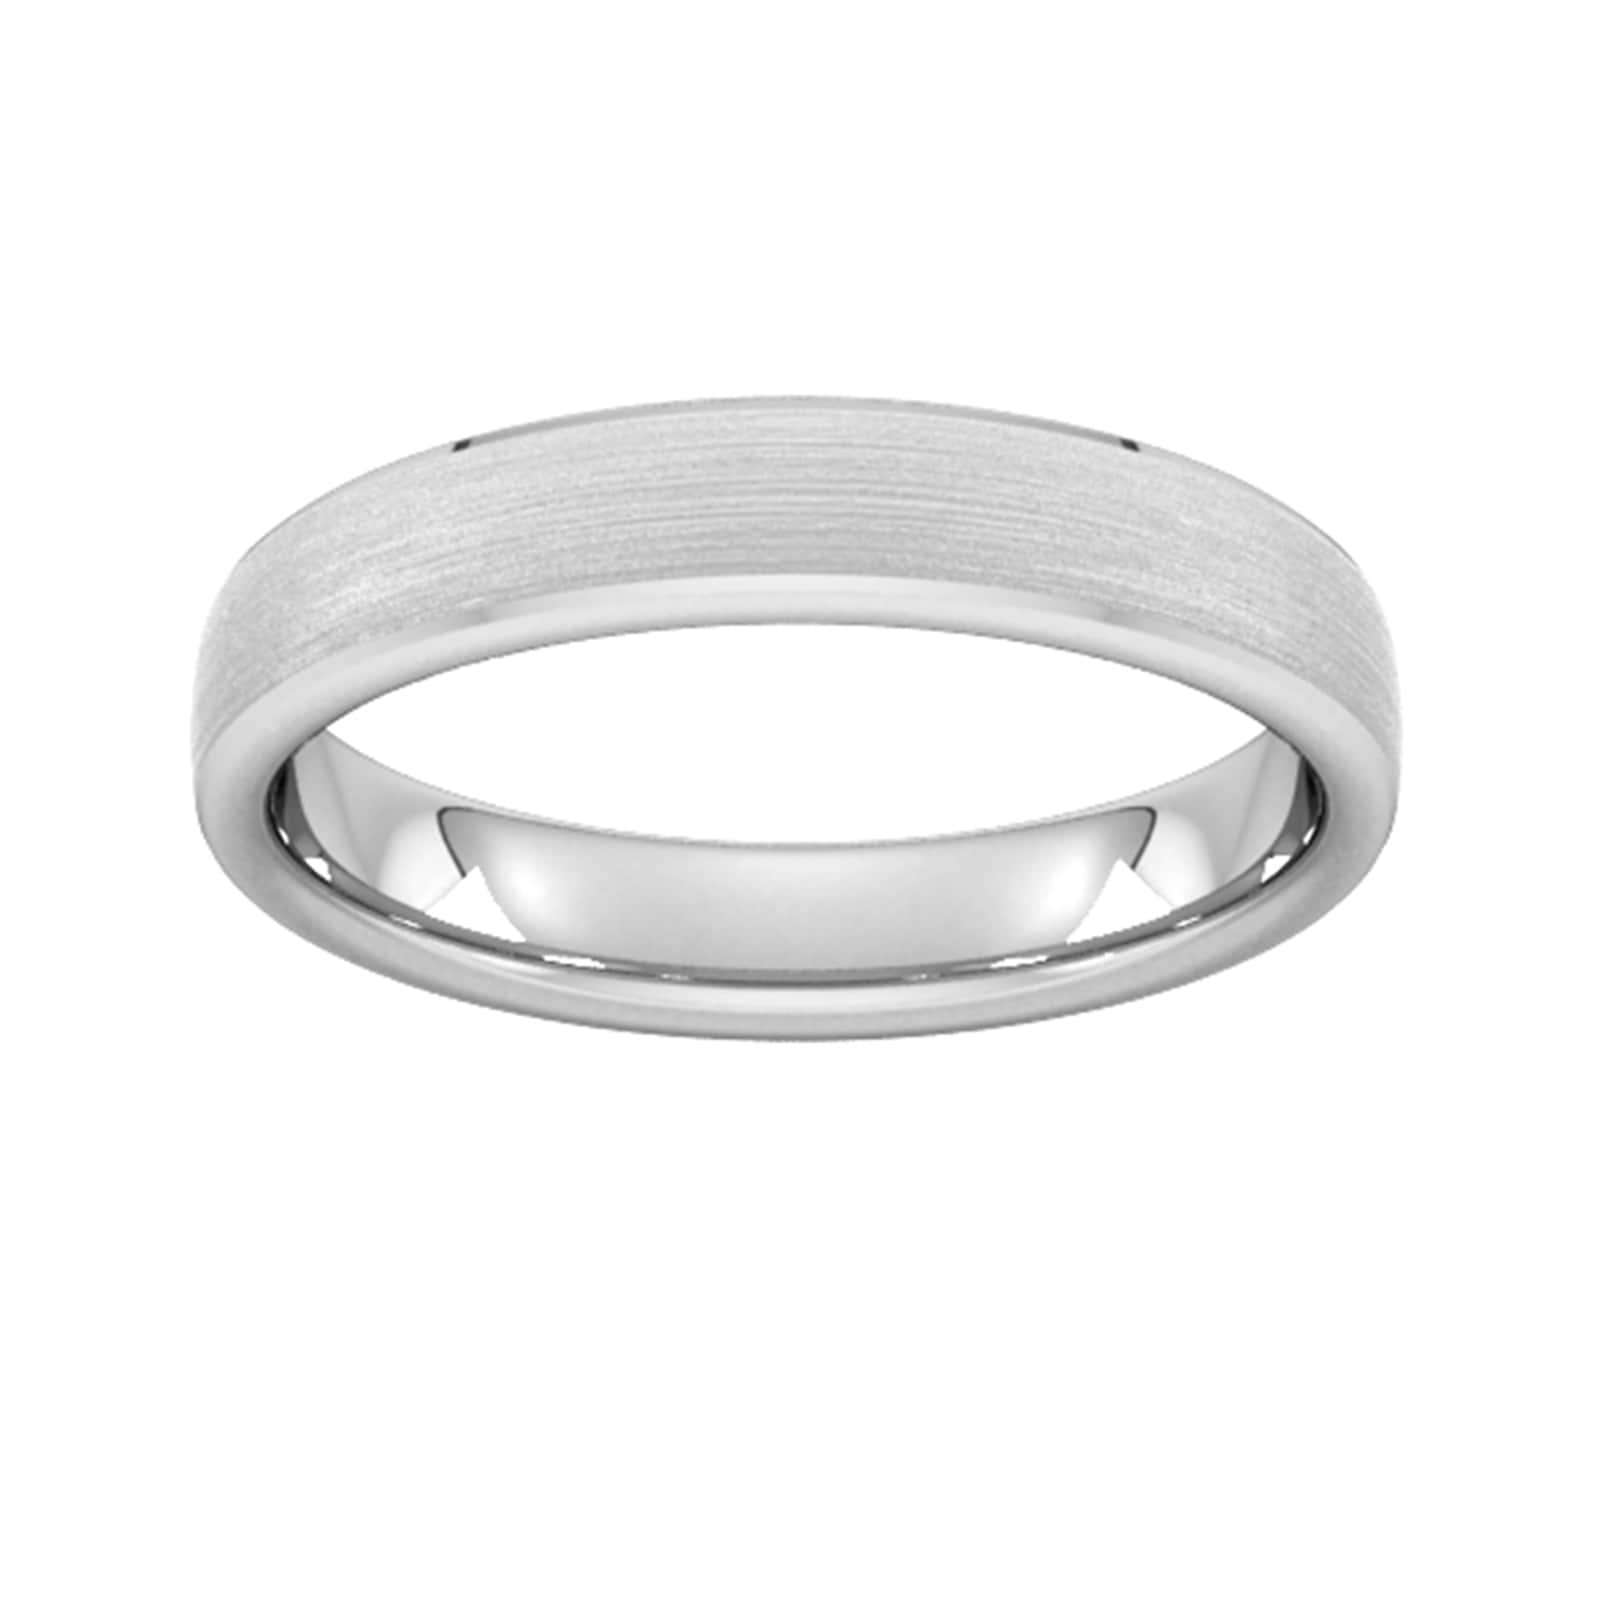 4mm Slight Court Extra Heavy Polished Chamfered Edges With Matt Centre Wedding Ring In 9 Carat White Gold - Ring Size K